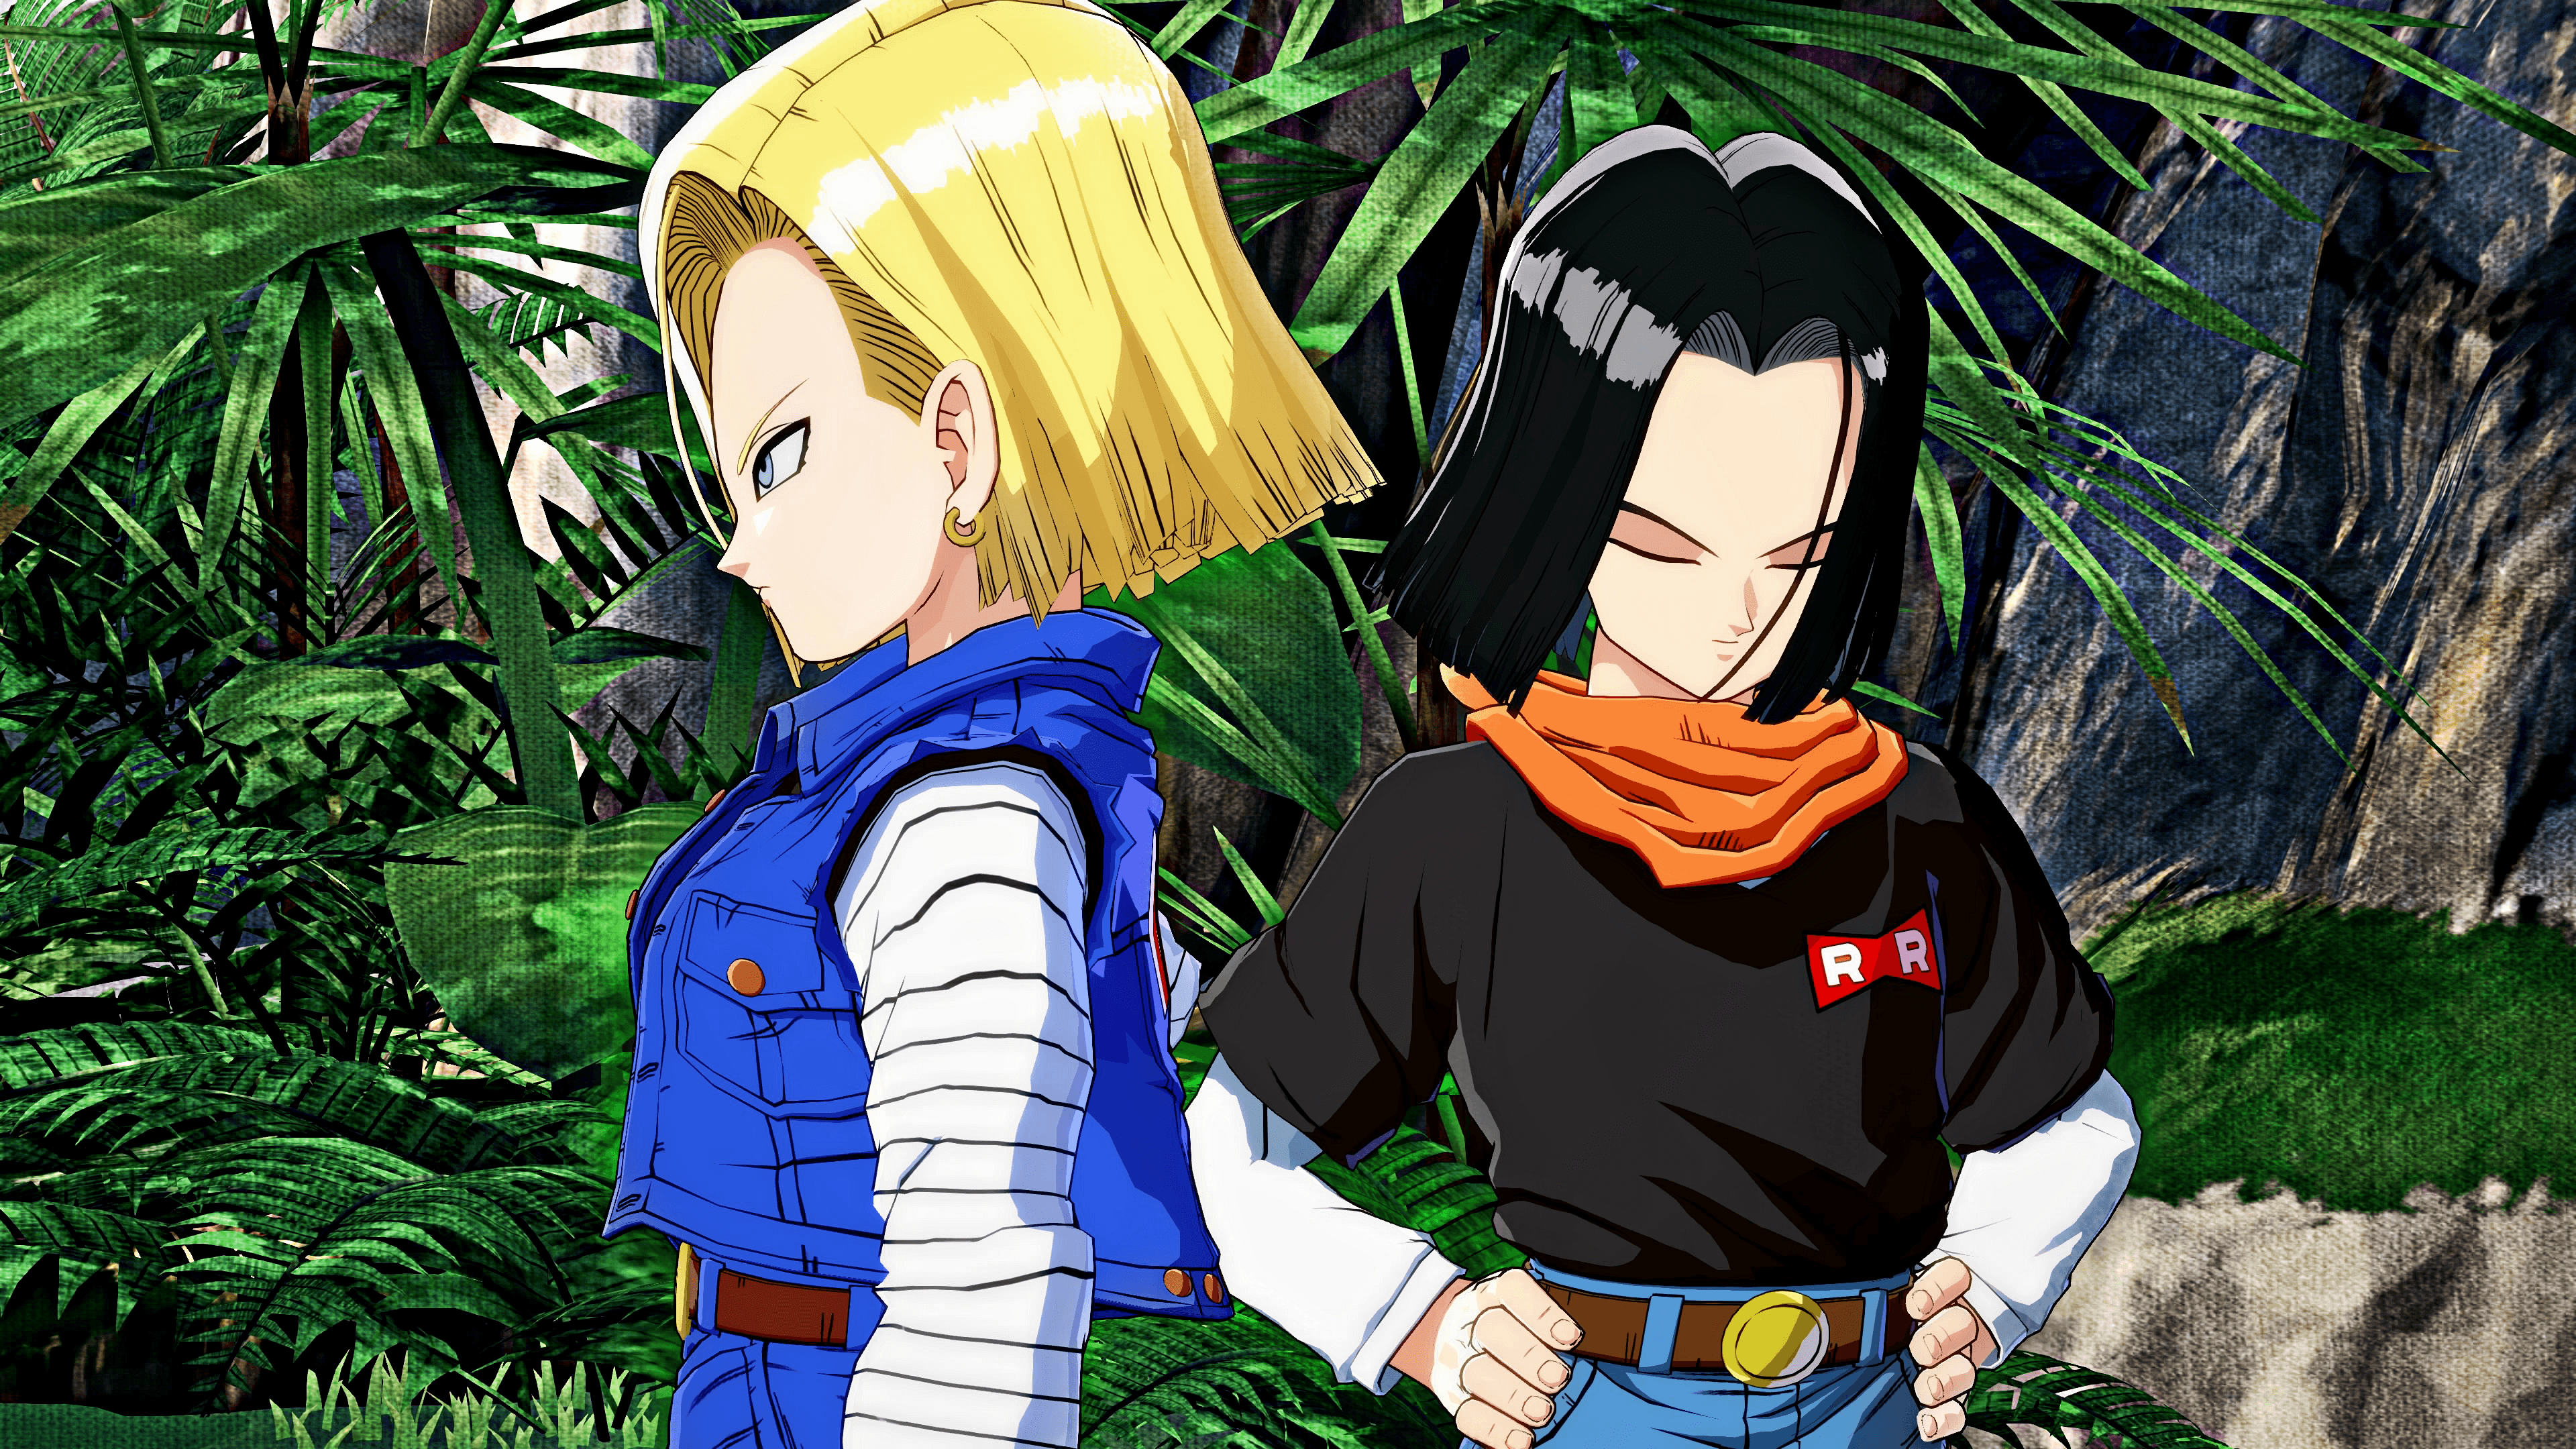 Android 18 and Android 17 4K Wallpaper